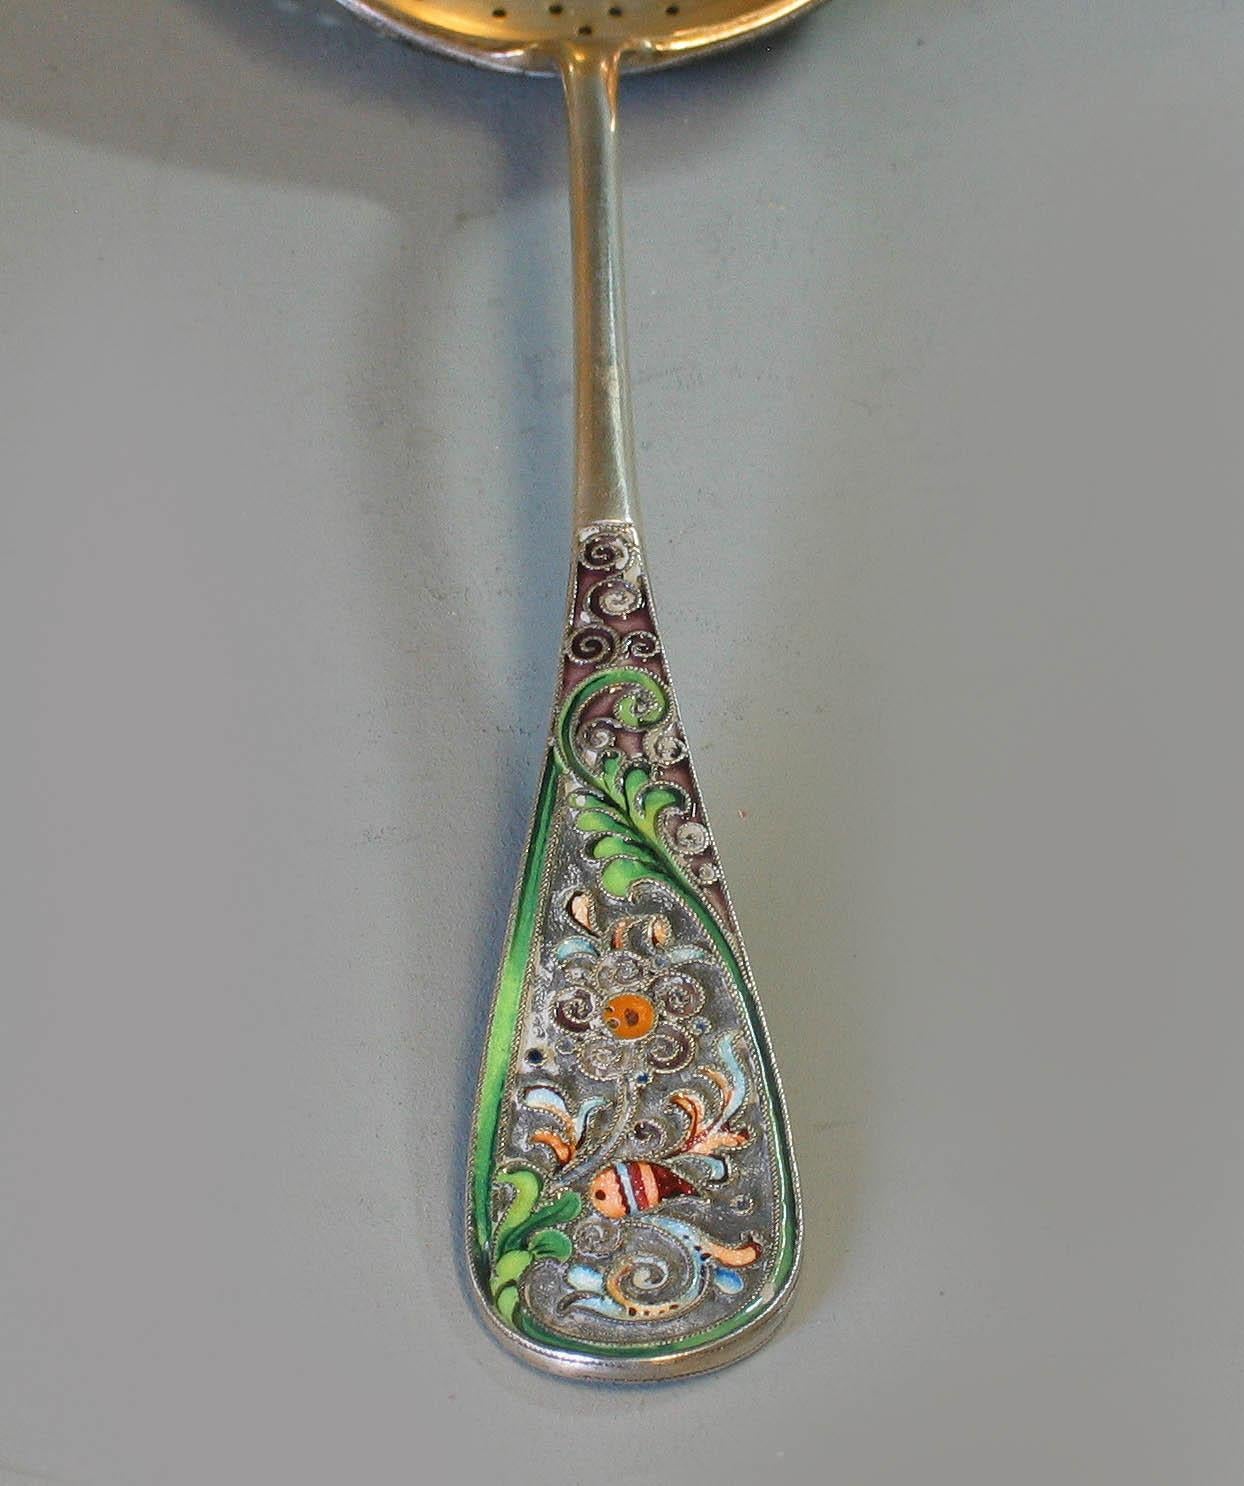 Baltic Russian Silver-Gilt & Cloissone Enamel Sifter Spoon 11th Artel Moscow, 1908-1917 For Sale